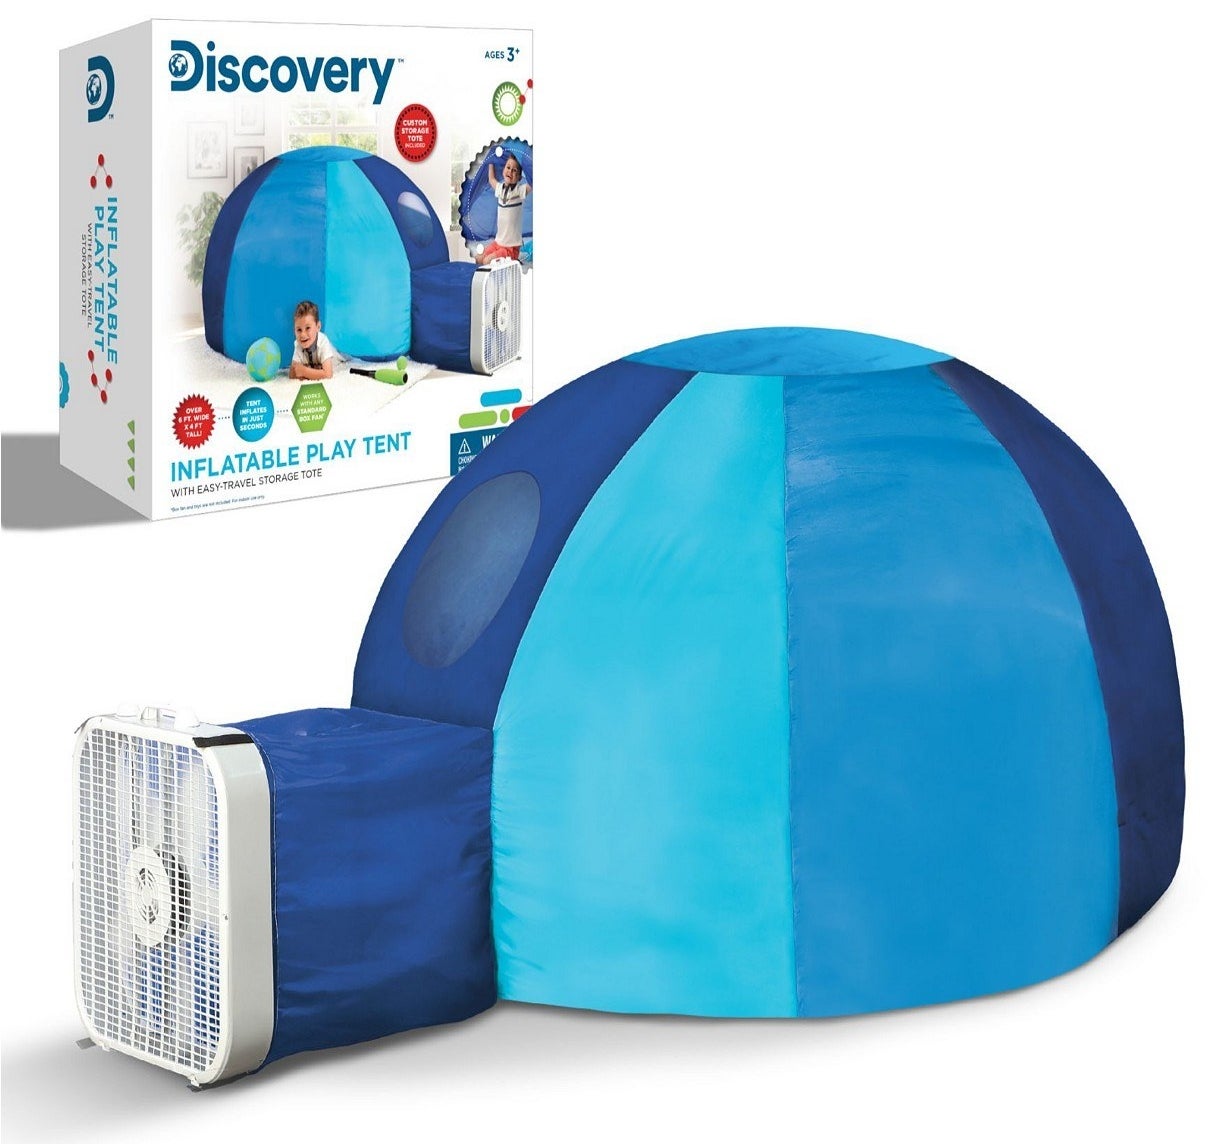 The inflatable tent